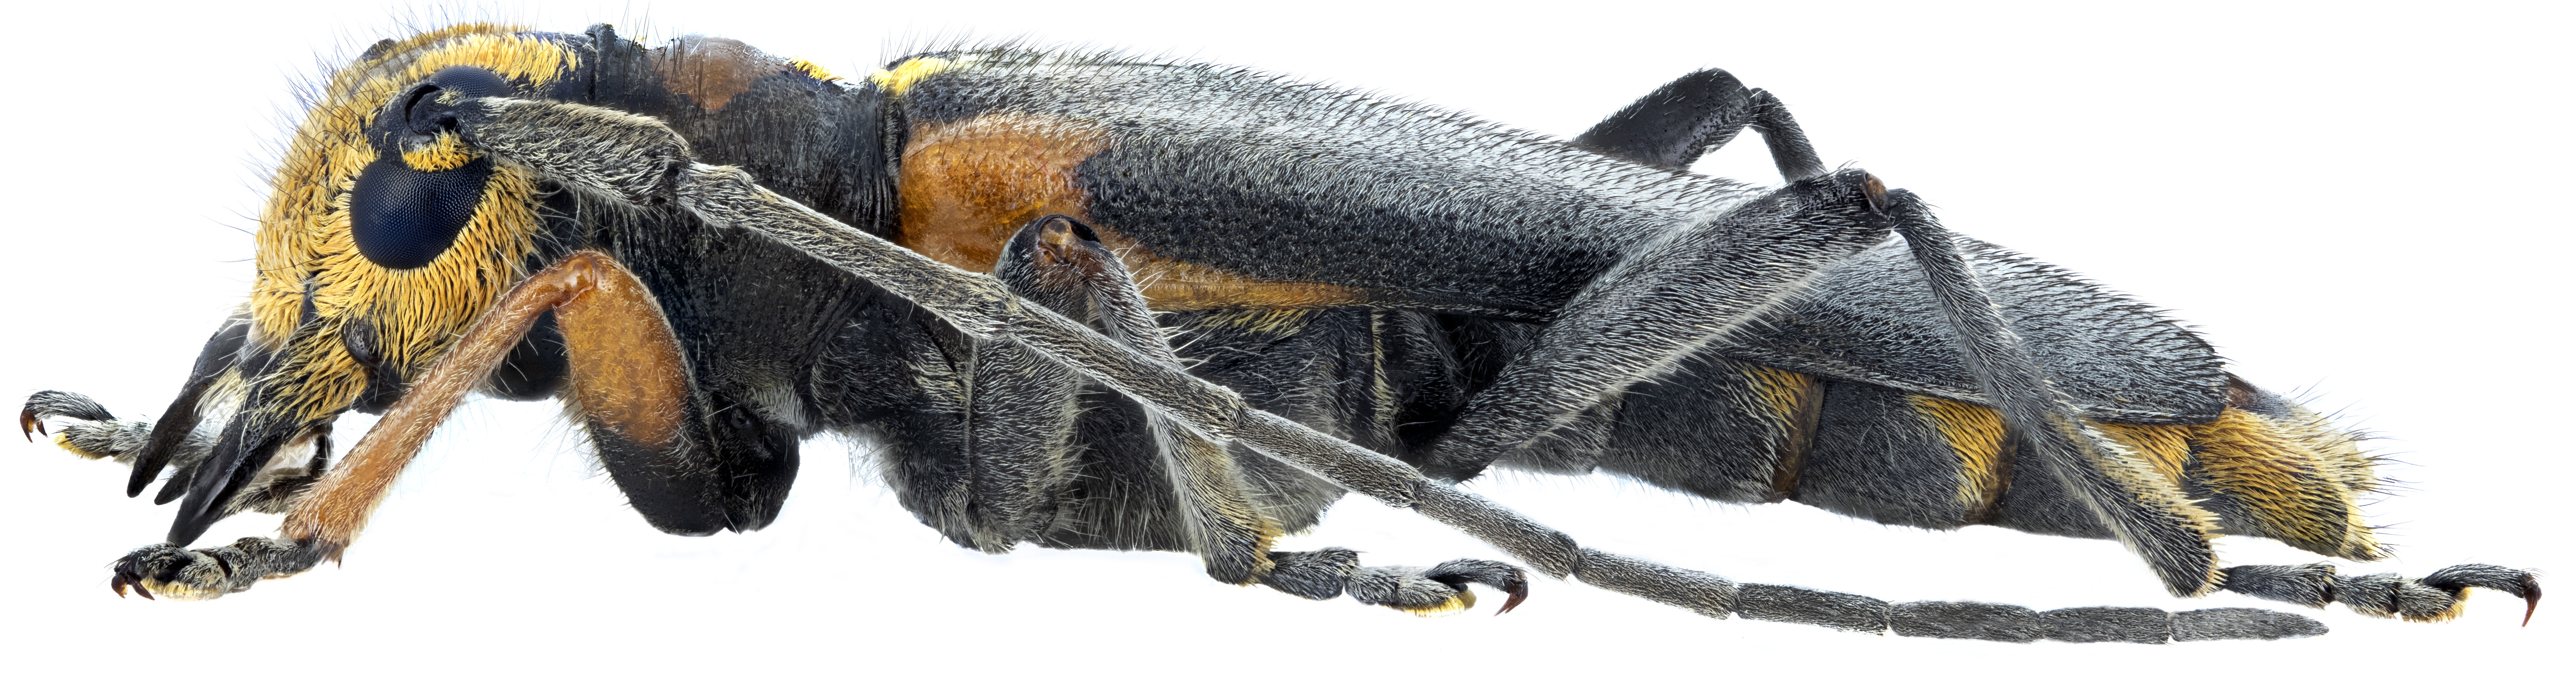 Phytoecia pontica - lateral view